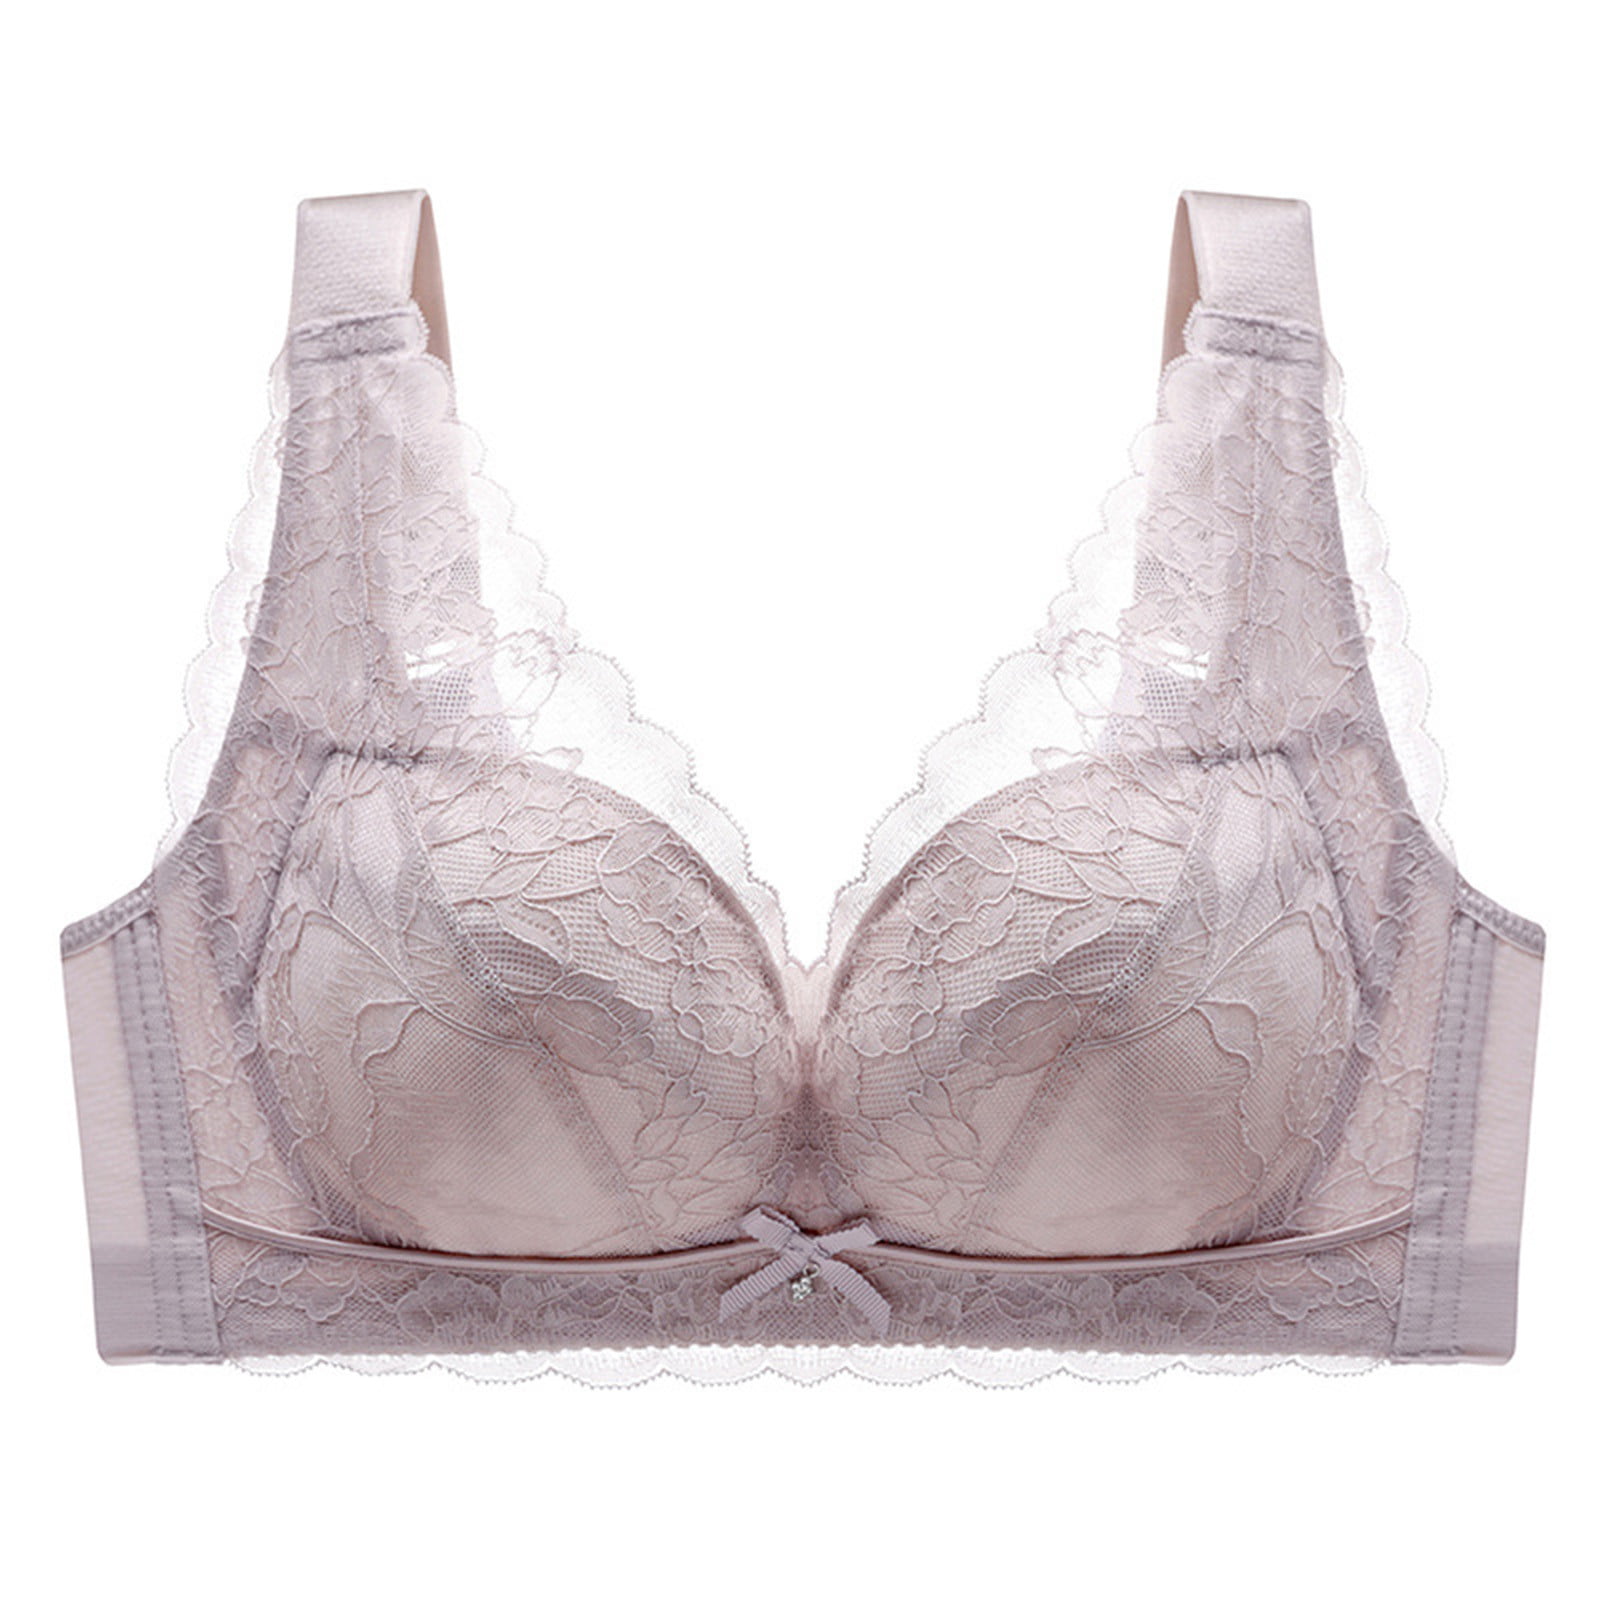 Viceroy Lingerie - Looking for a wire-free bra with a beautiful